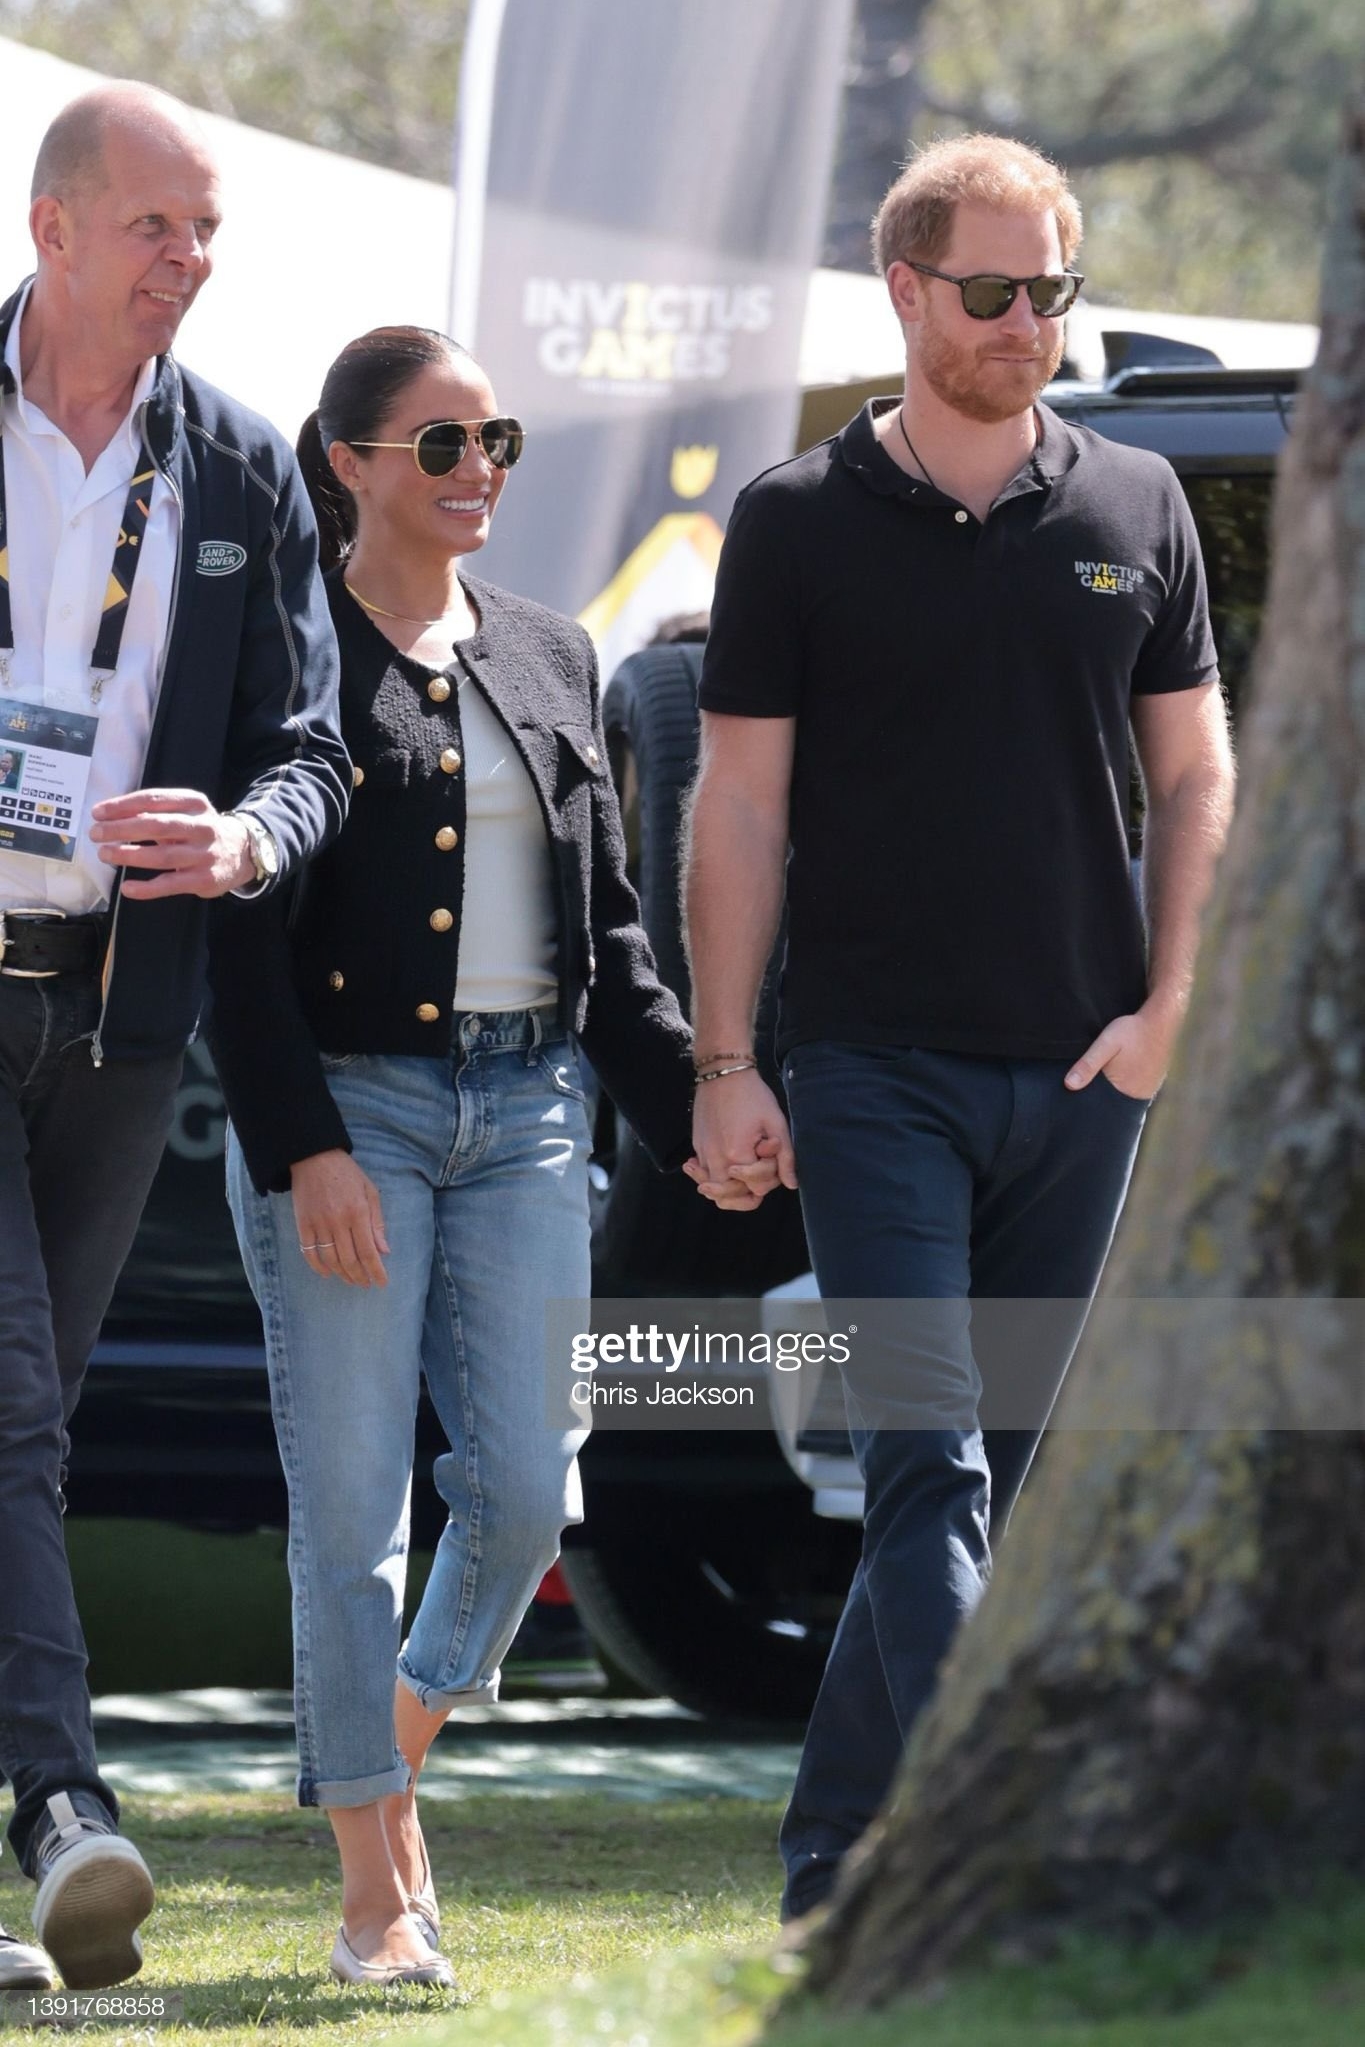 prince-harry-meghan-markle-attends-zuiderpark-invictus-games-jaguar-land-rover-challenge-2022